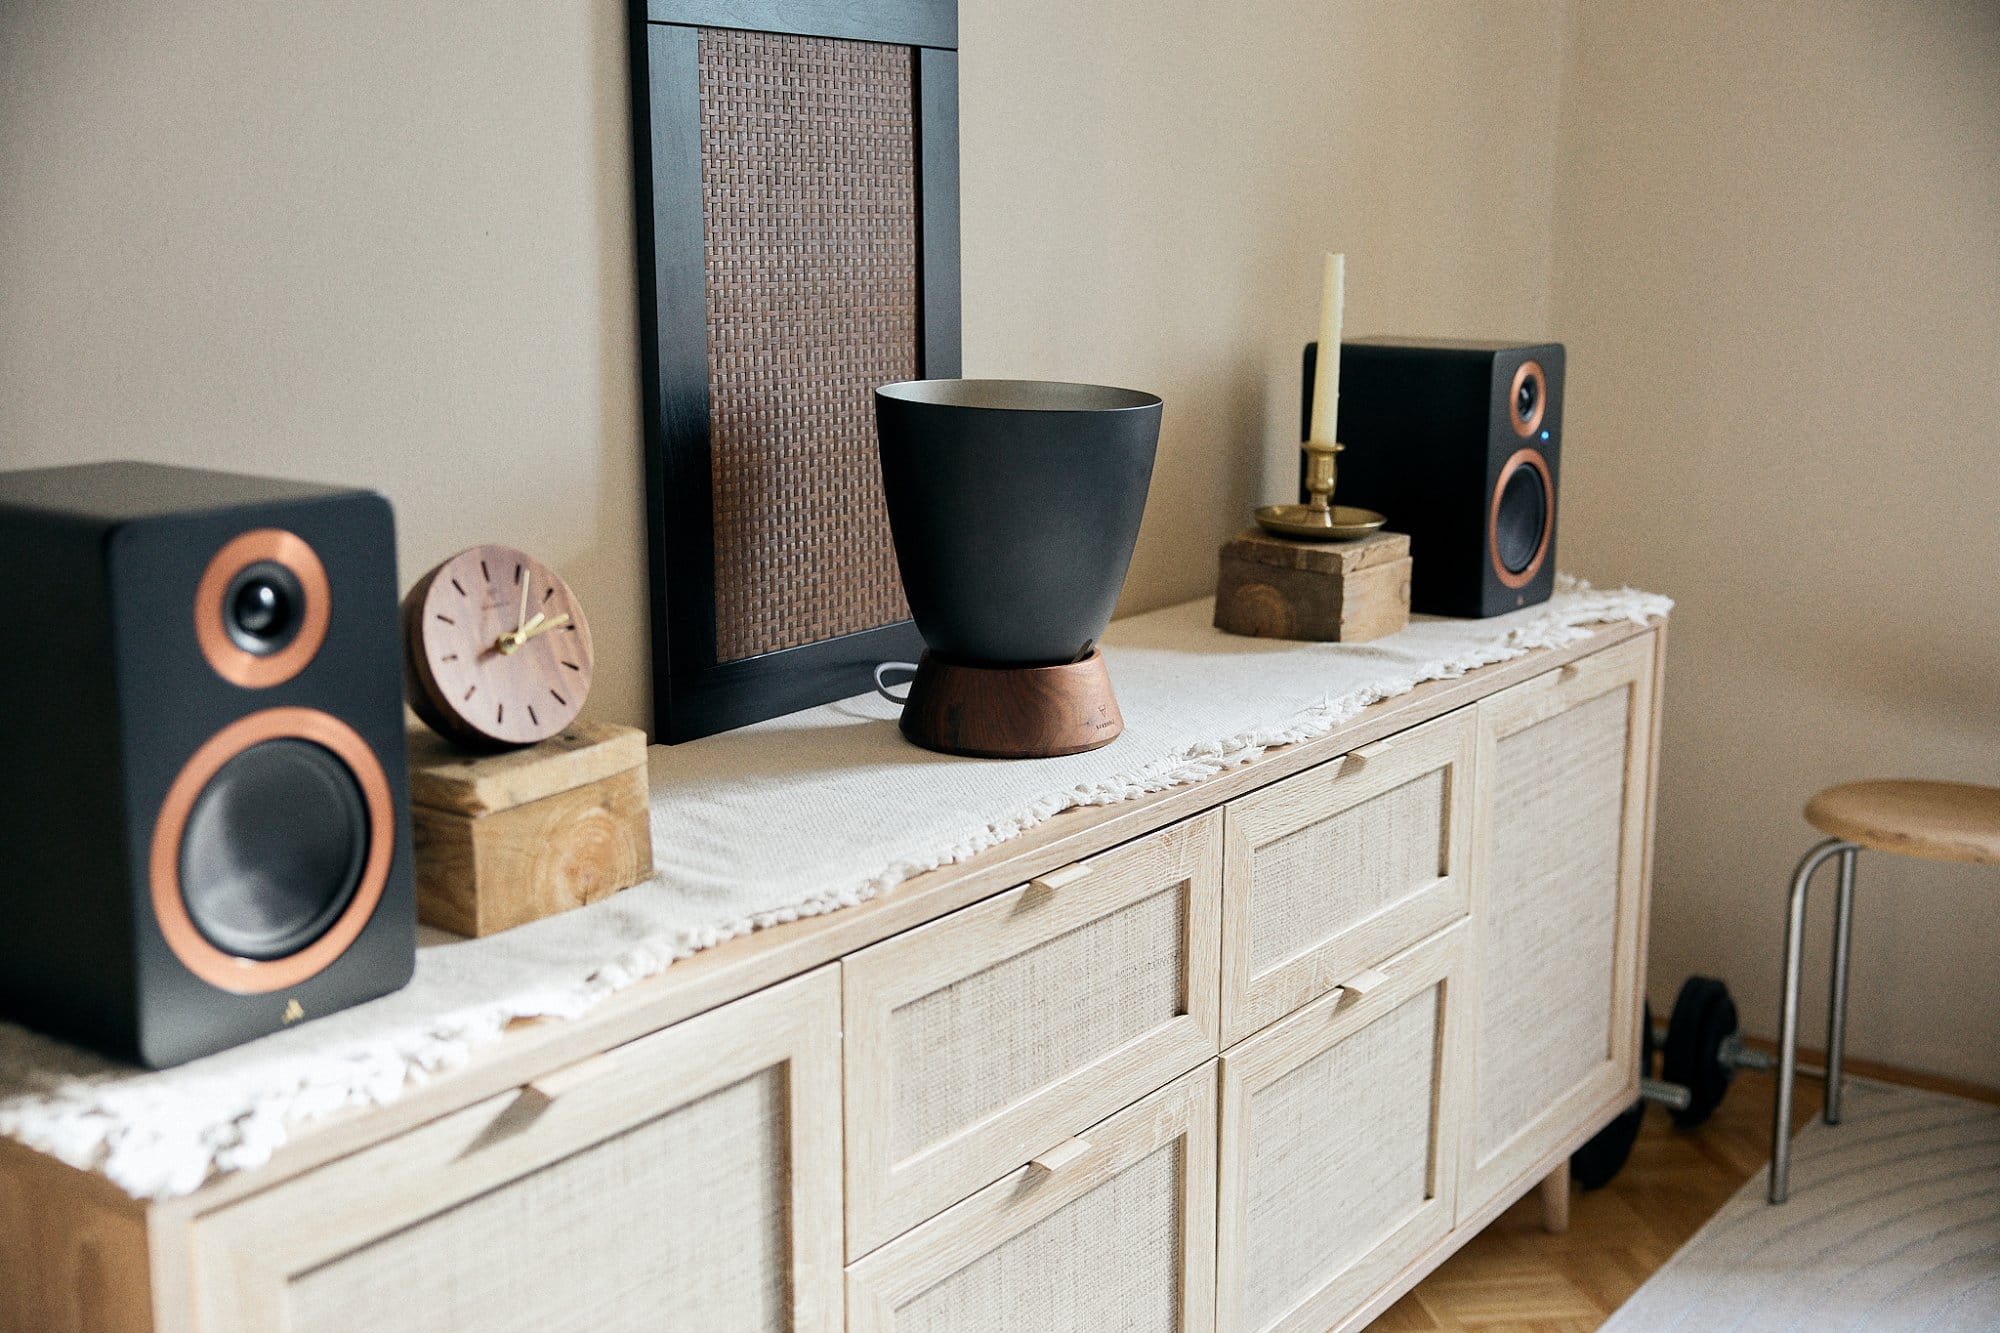 A stylishly arranged sideboard in a living room featuring bookshelf speakers, a modern vase on a wooden stand, a pink clock, a candle holder, and a woven runner